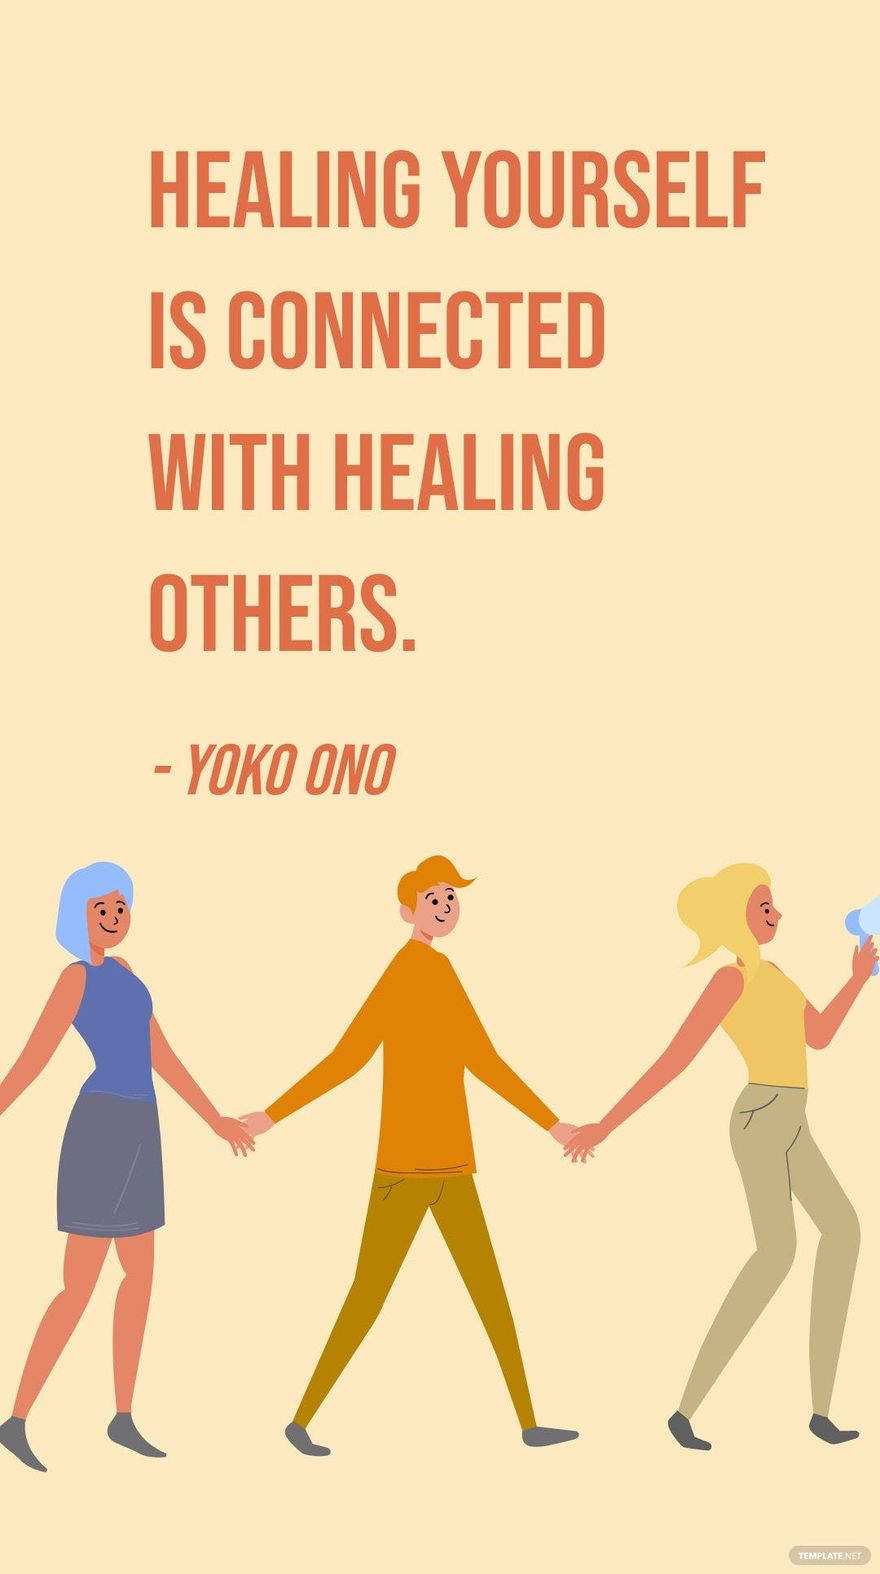 Yoko Ono - Healing yourself is connected with healing others. in JPG